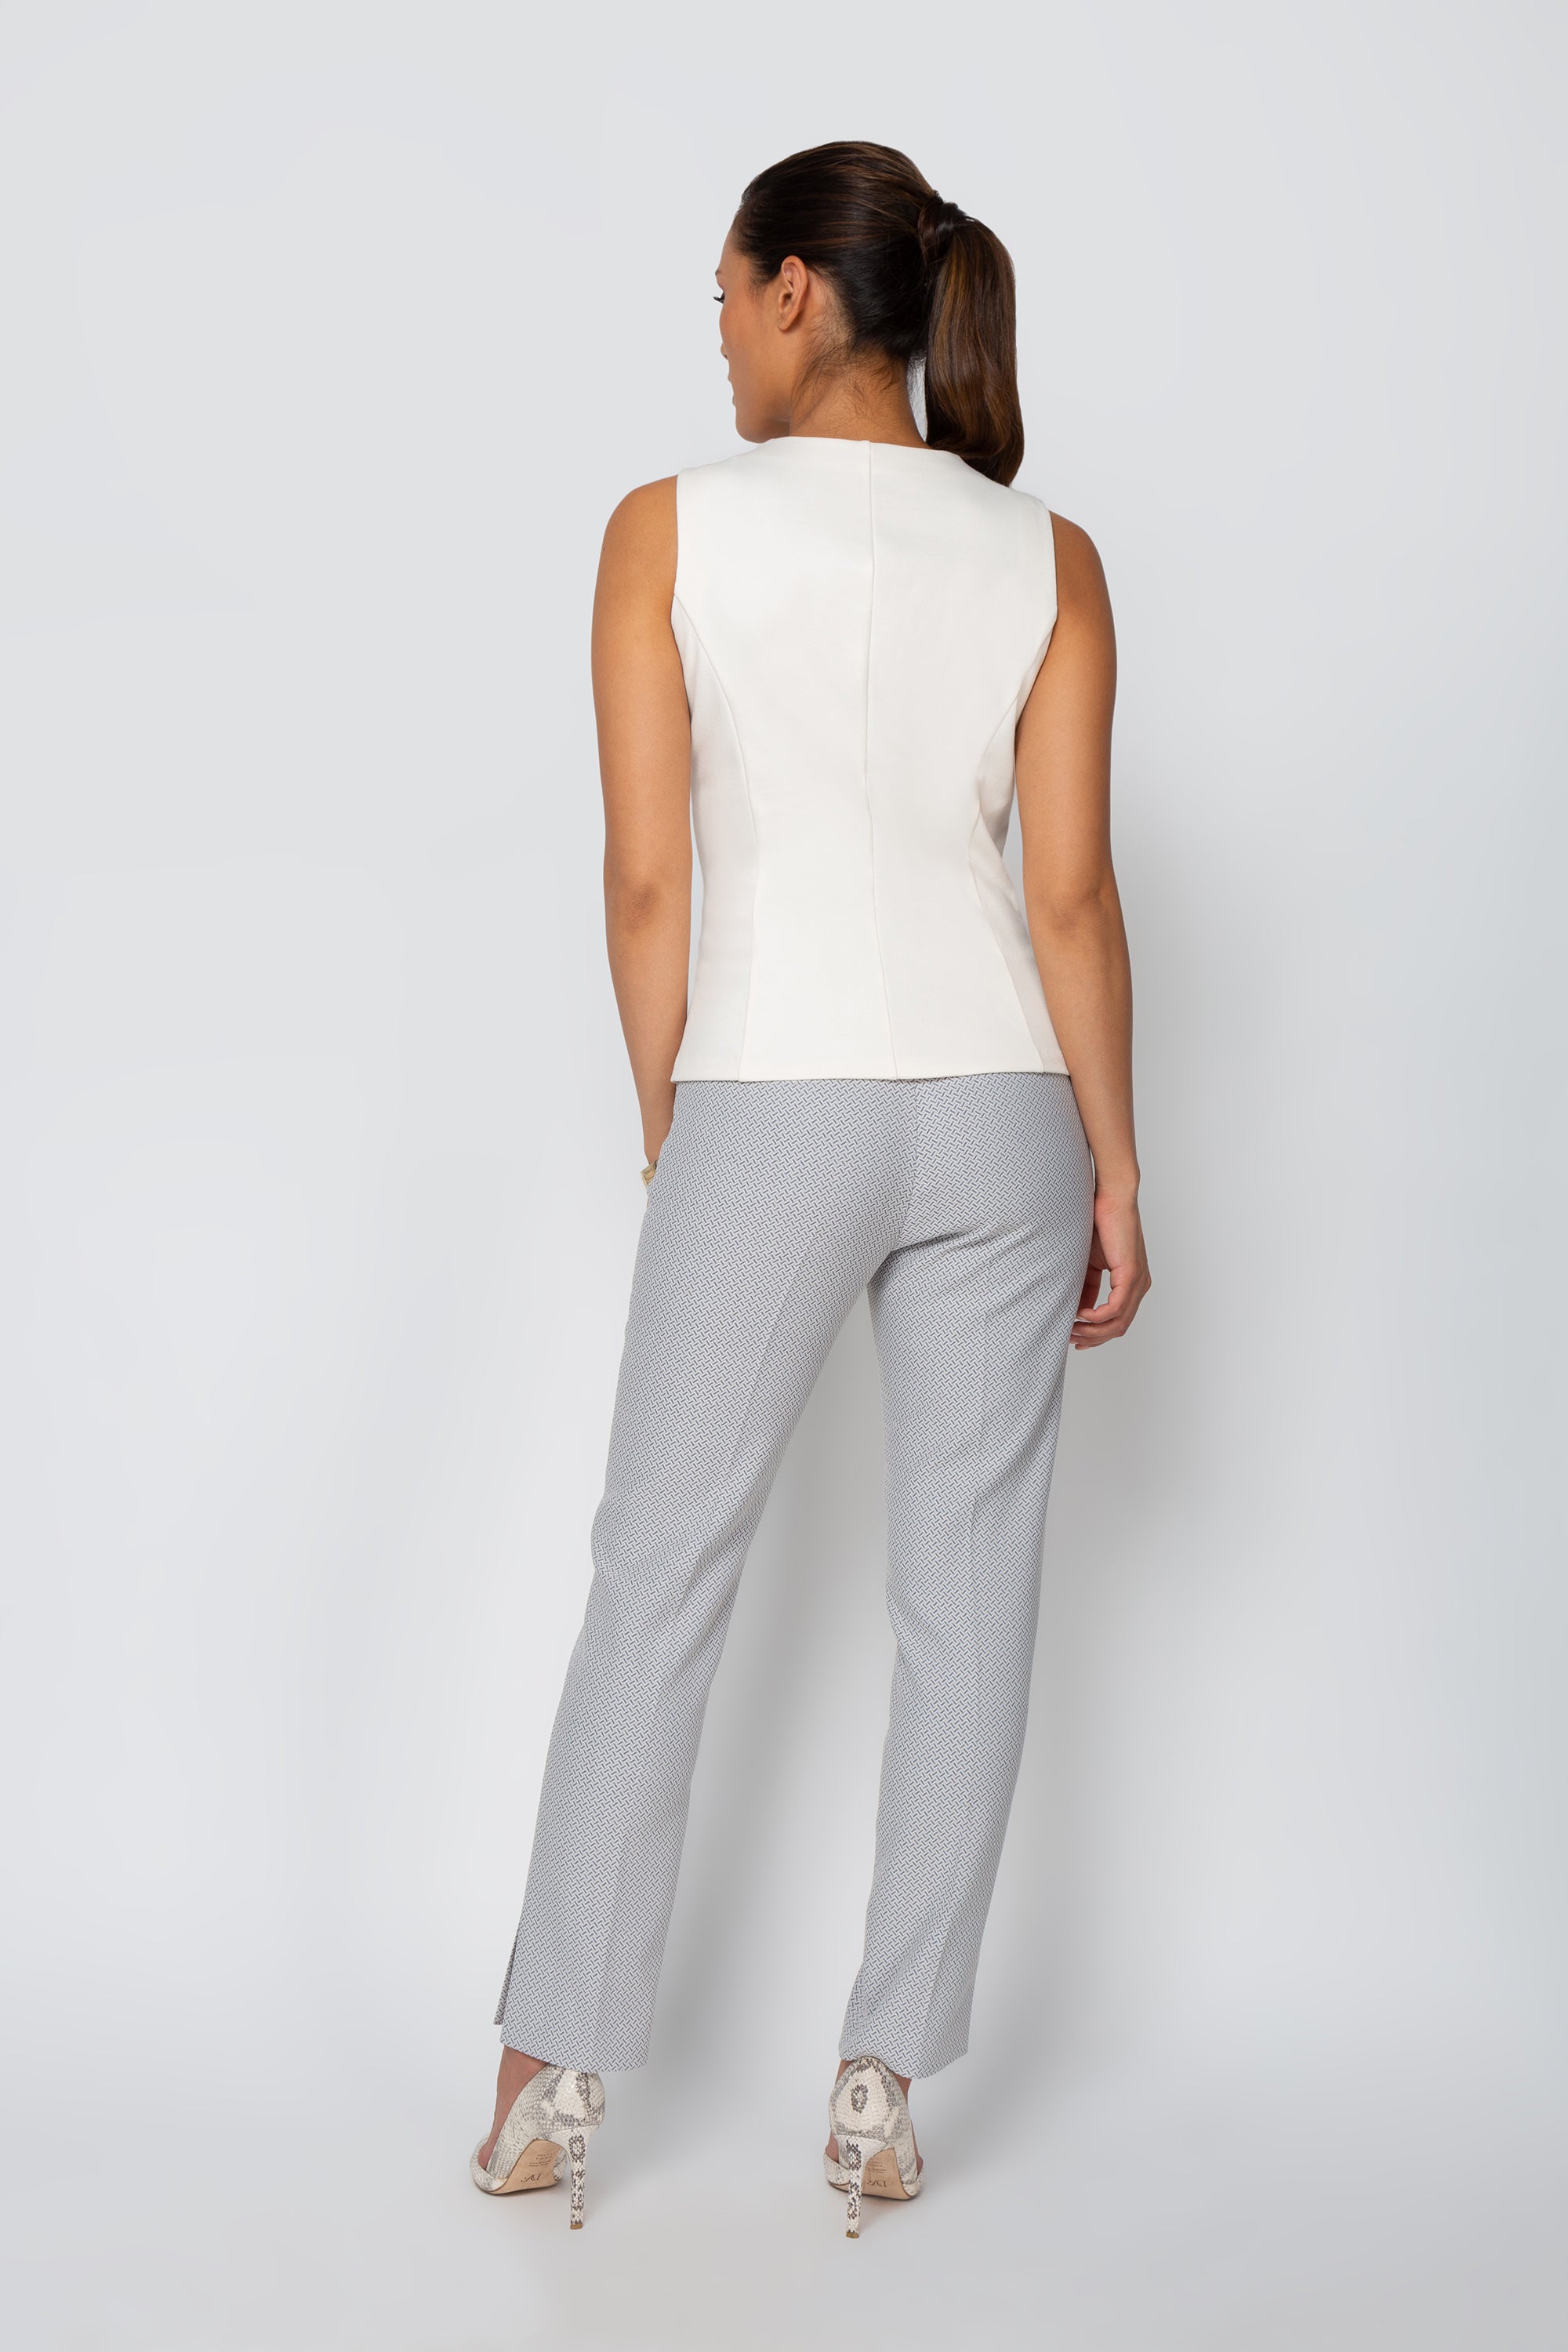 Women' Business Naomi Top - Ivory NORA GARDNER | OFFICIAL STORE for work and office